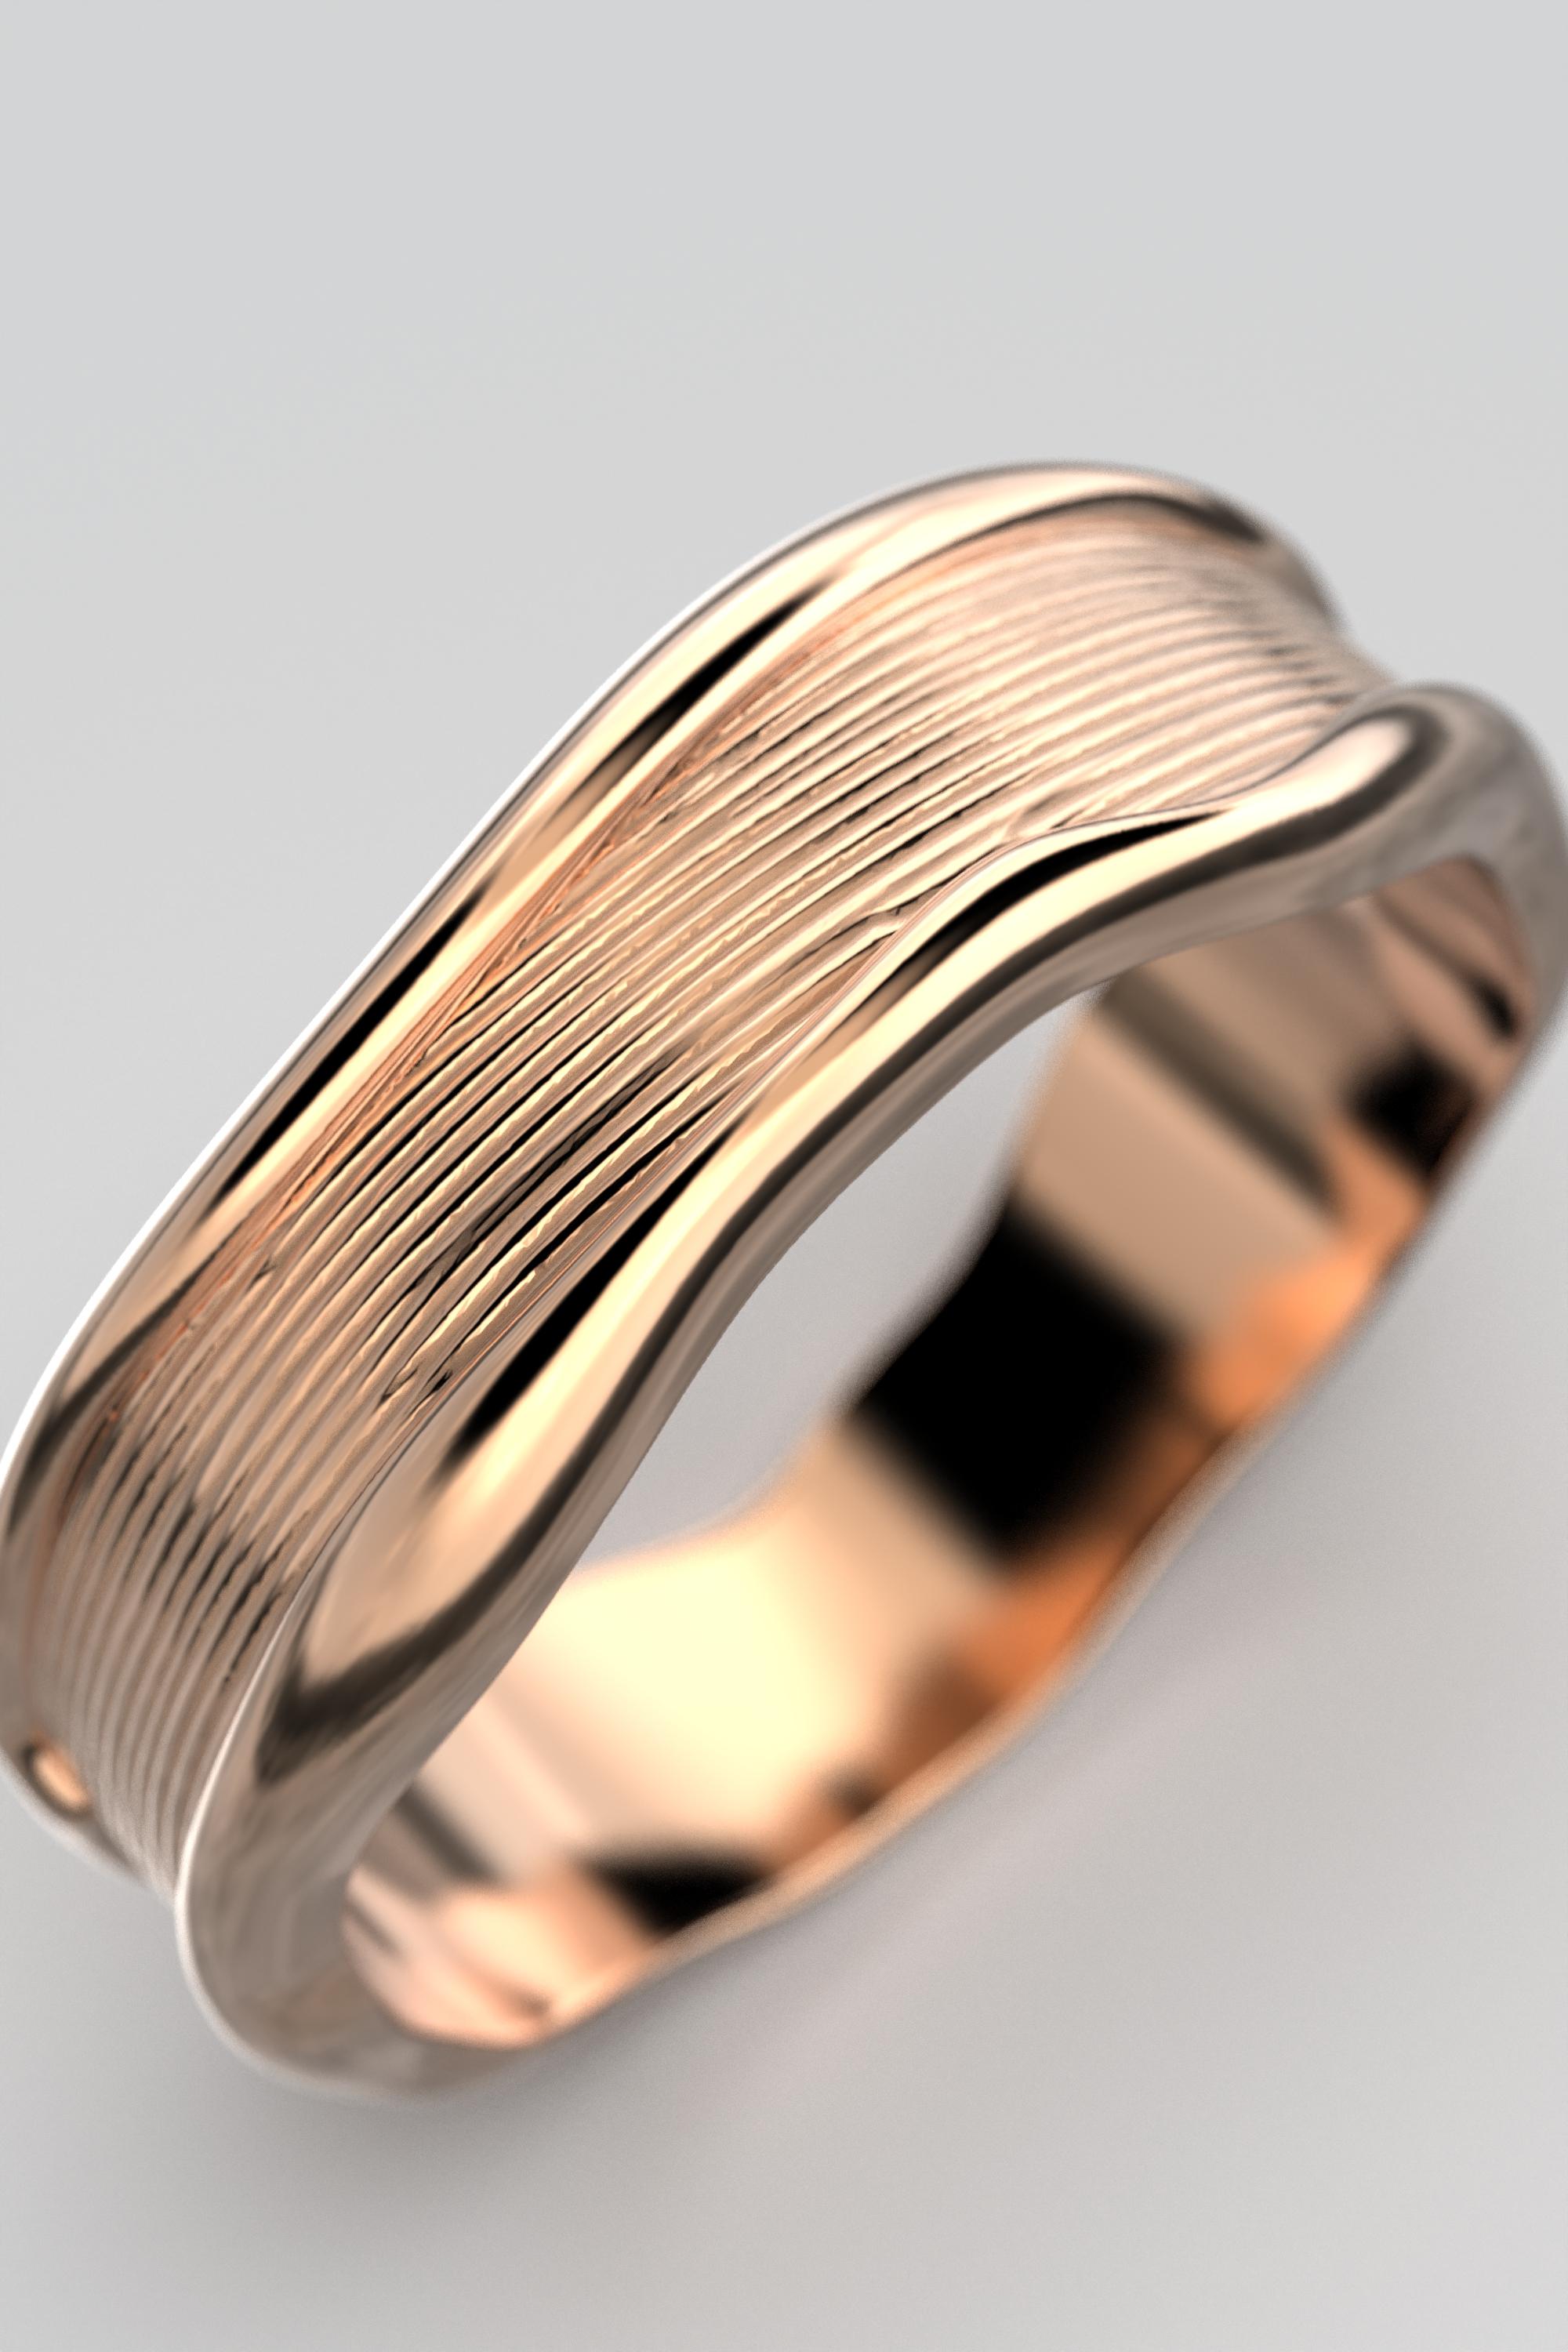 For Sale:  Unisex 18k Gold Band Ring with Hand-Engraved Organic Design Made in Italy 6